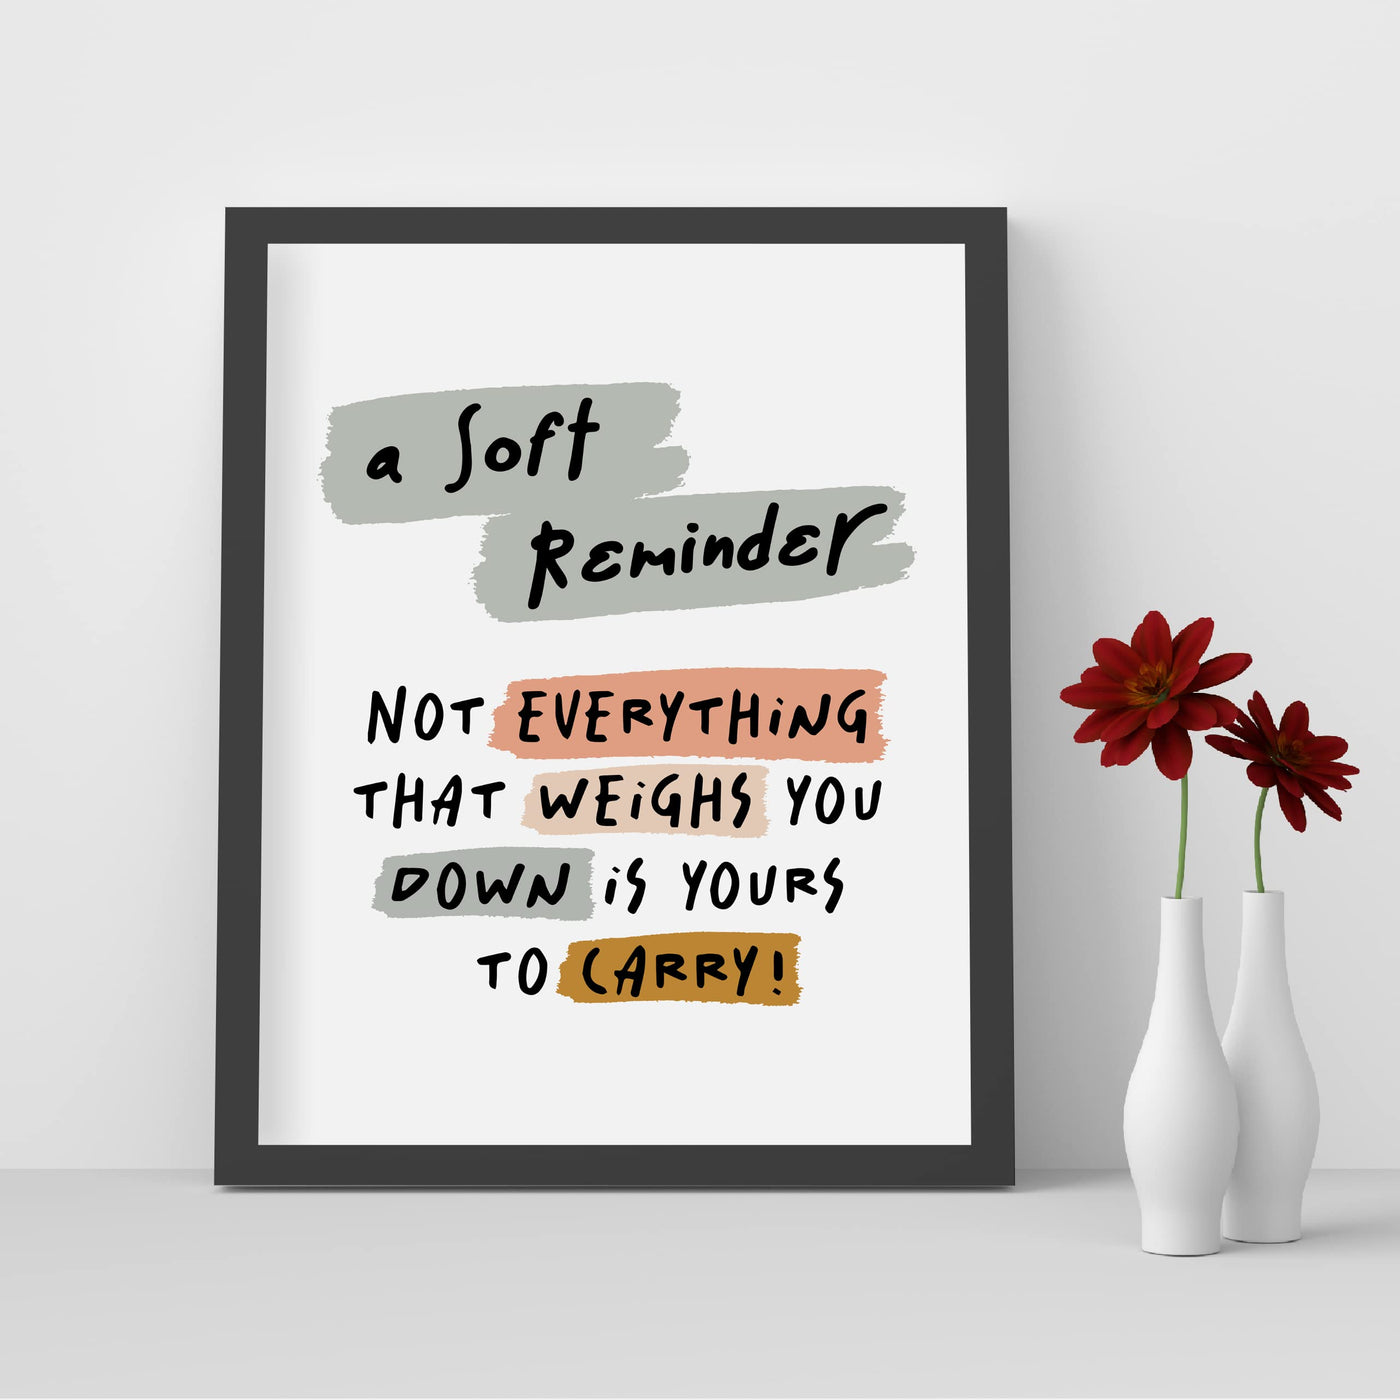 Not Everything That Weighs You Down Is Yours To Carry- Inspirational Quotes Wall Art Sign -8 x 10" Modern Typography Print -Ready to Frame. Motivational Home-Office-Classroom Decor. Great Gift!